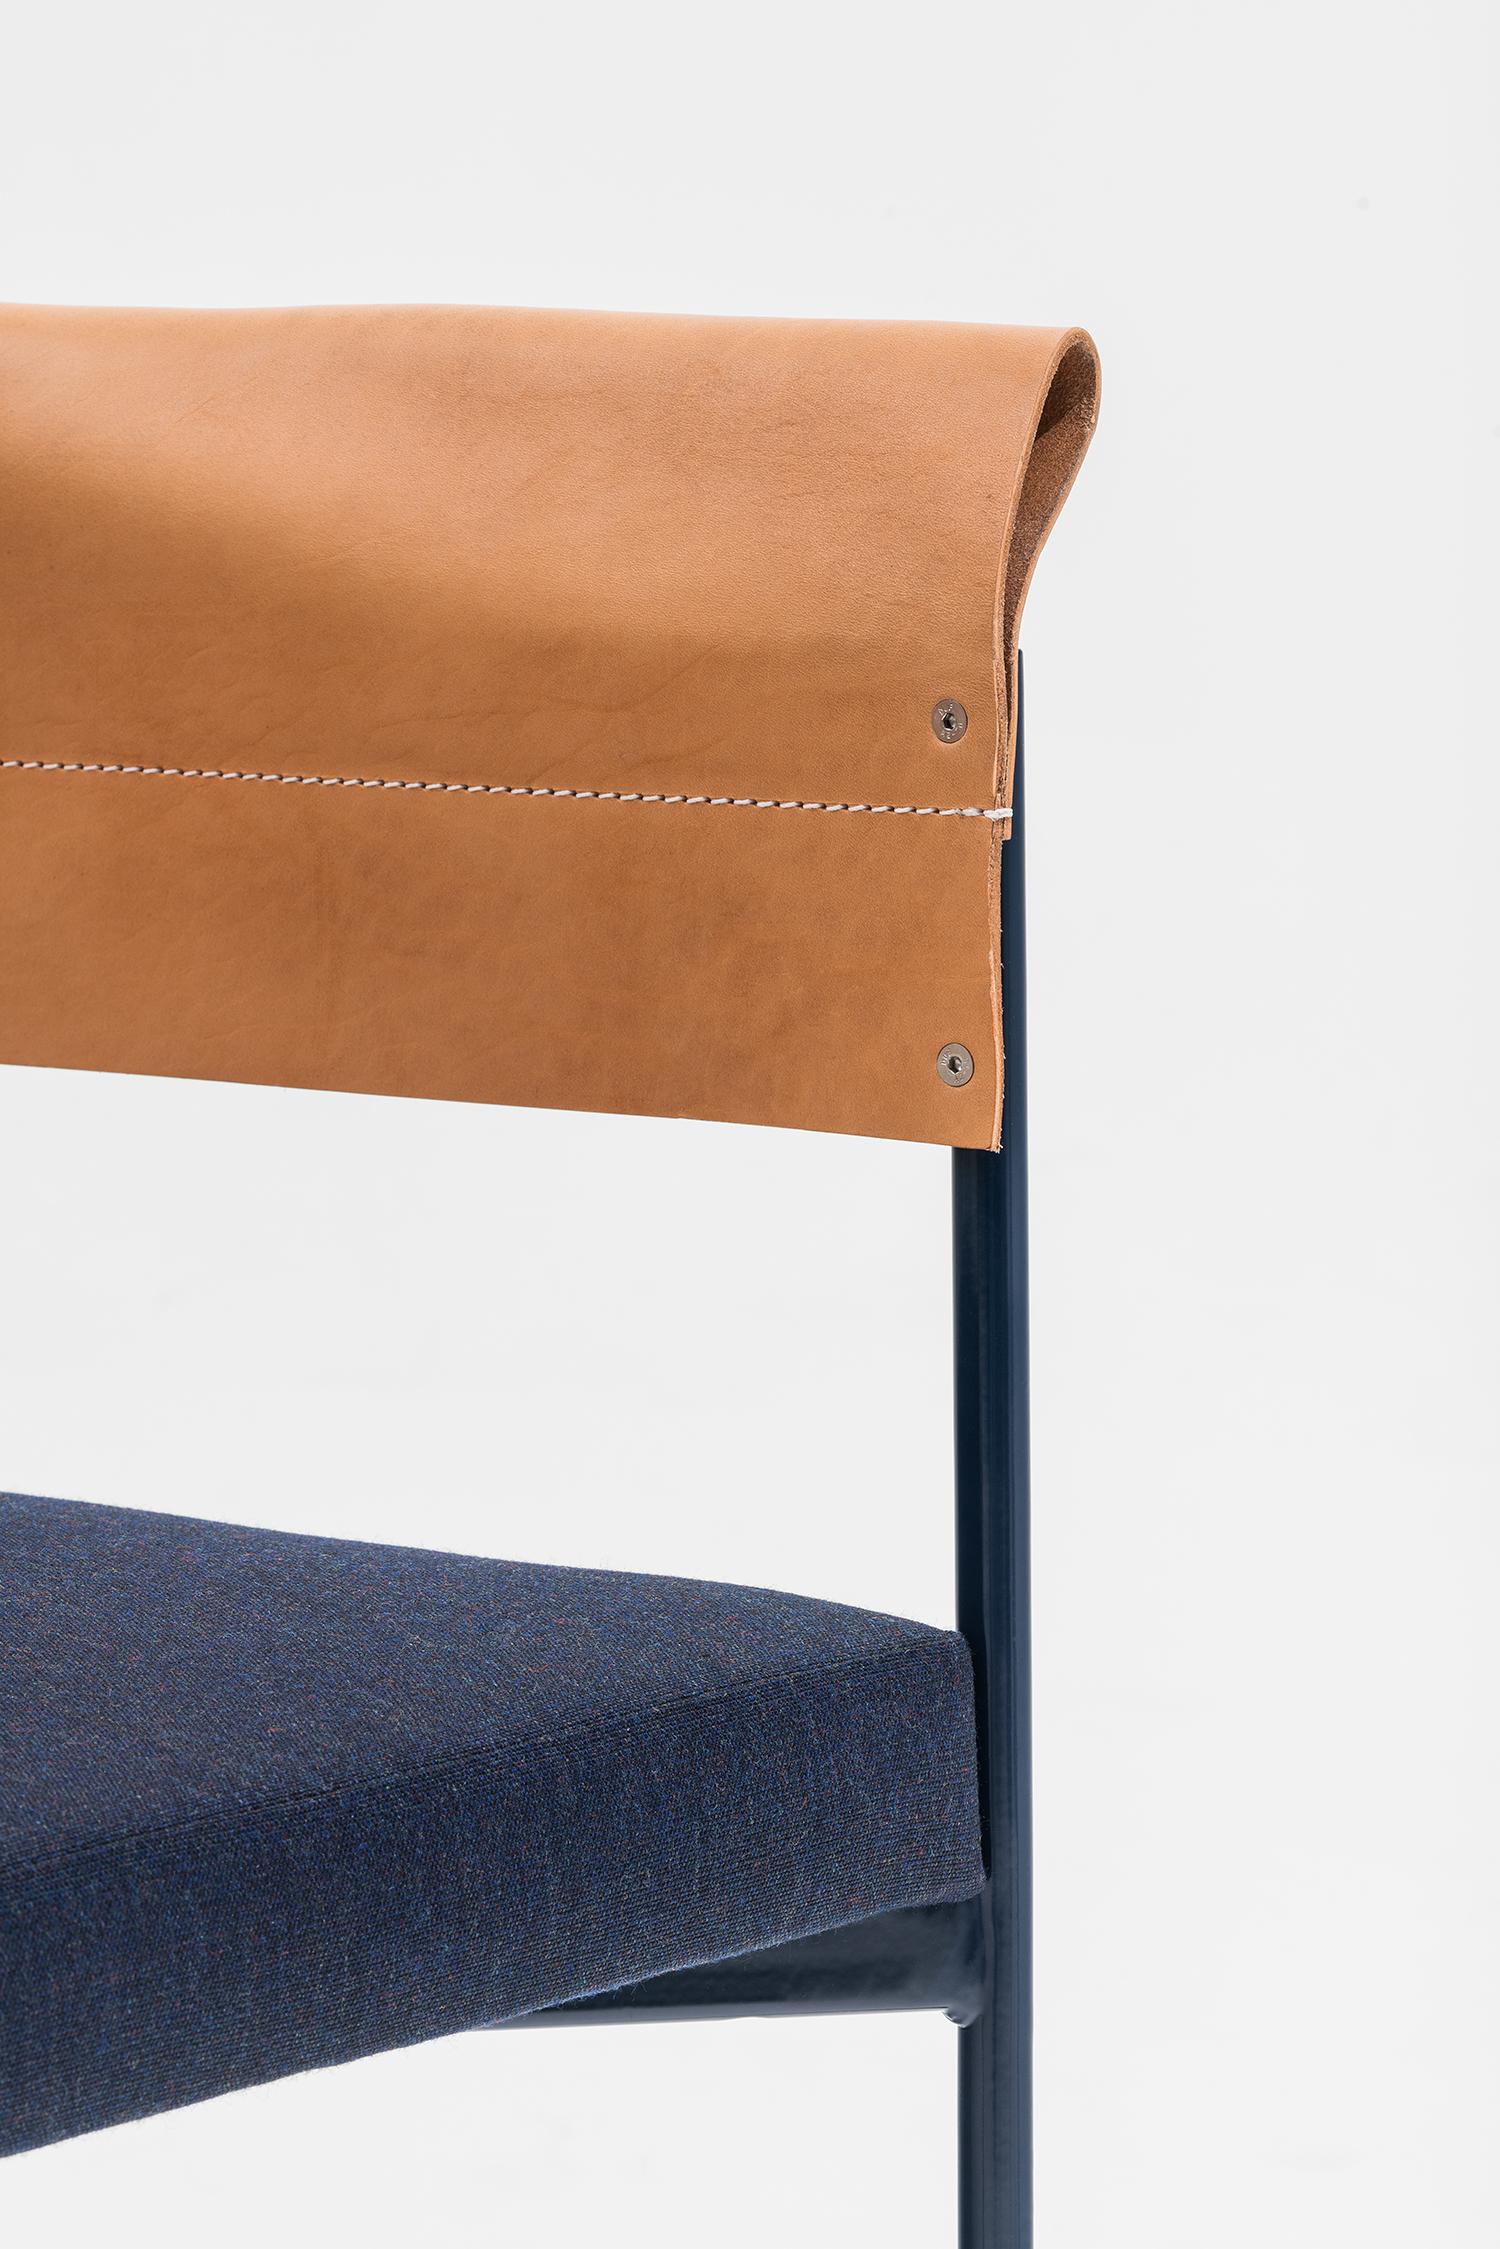 Armchair made with a thin and elegant hand-welded steel frame whose curvature supports the precious leather, folded and sewn to act as a backrest and the same time as an armrest. Available in red, blue, black structure as per the full grain leather